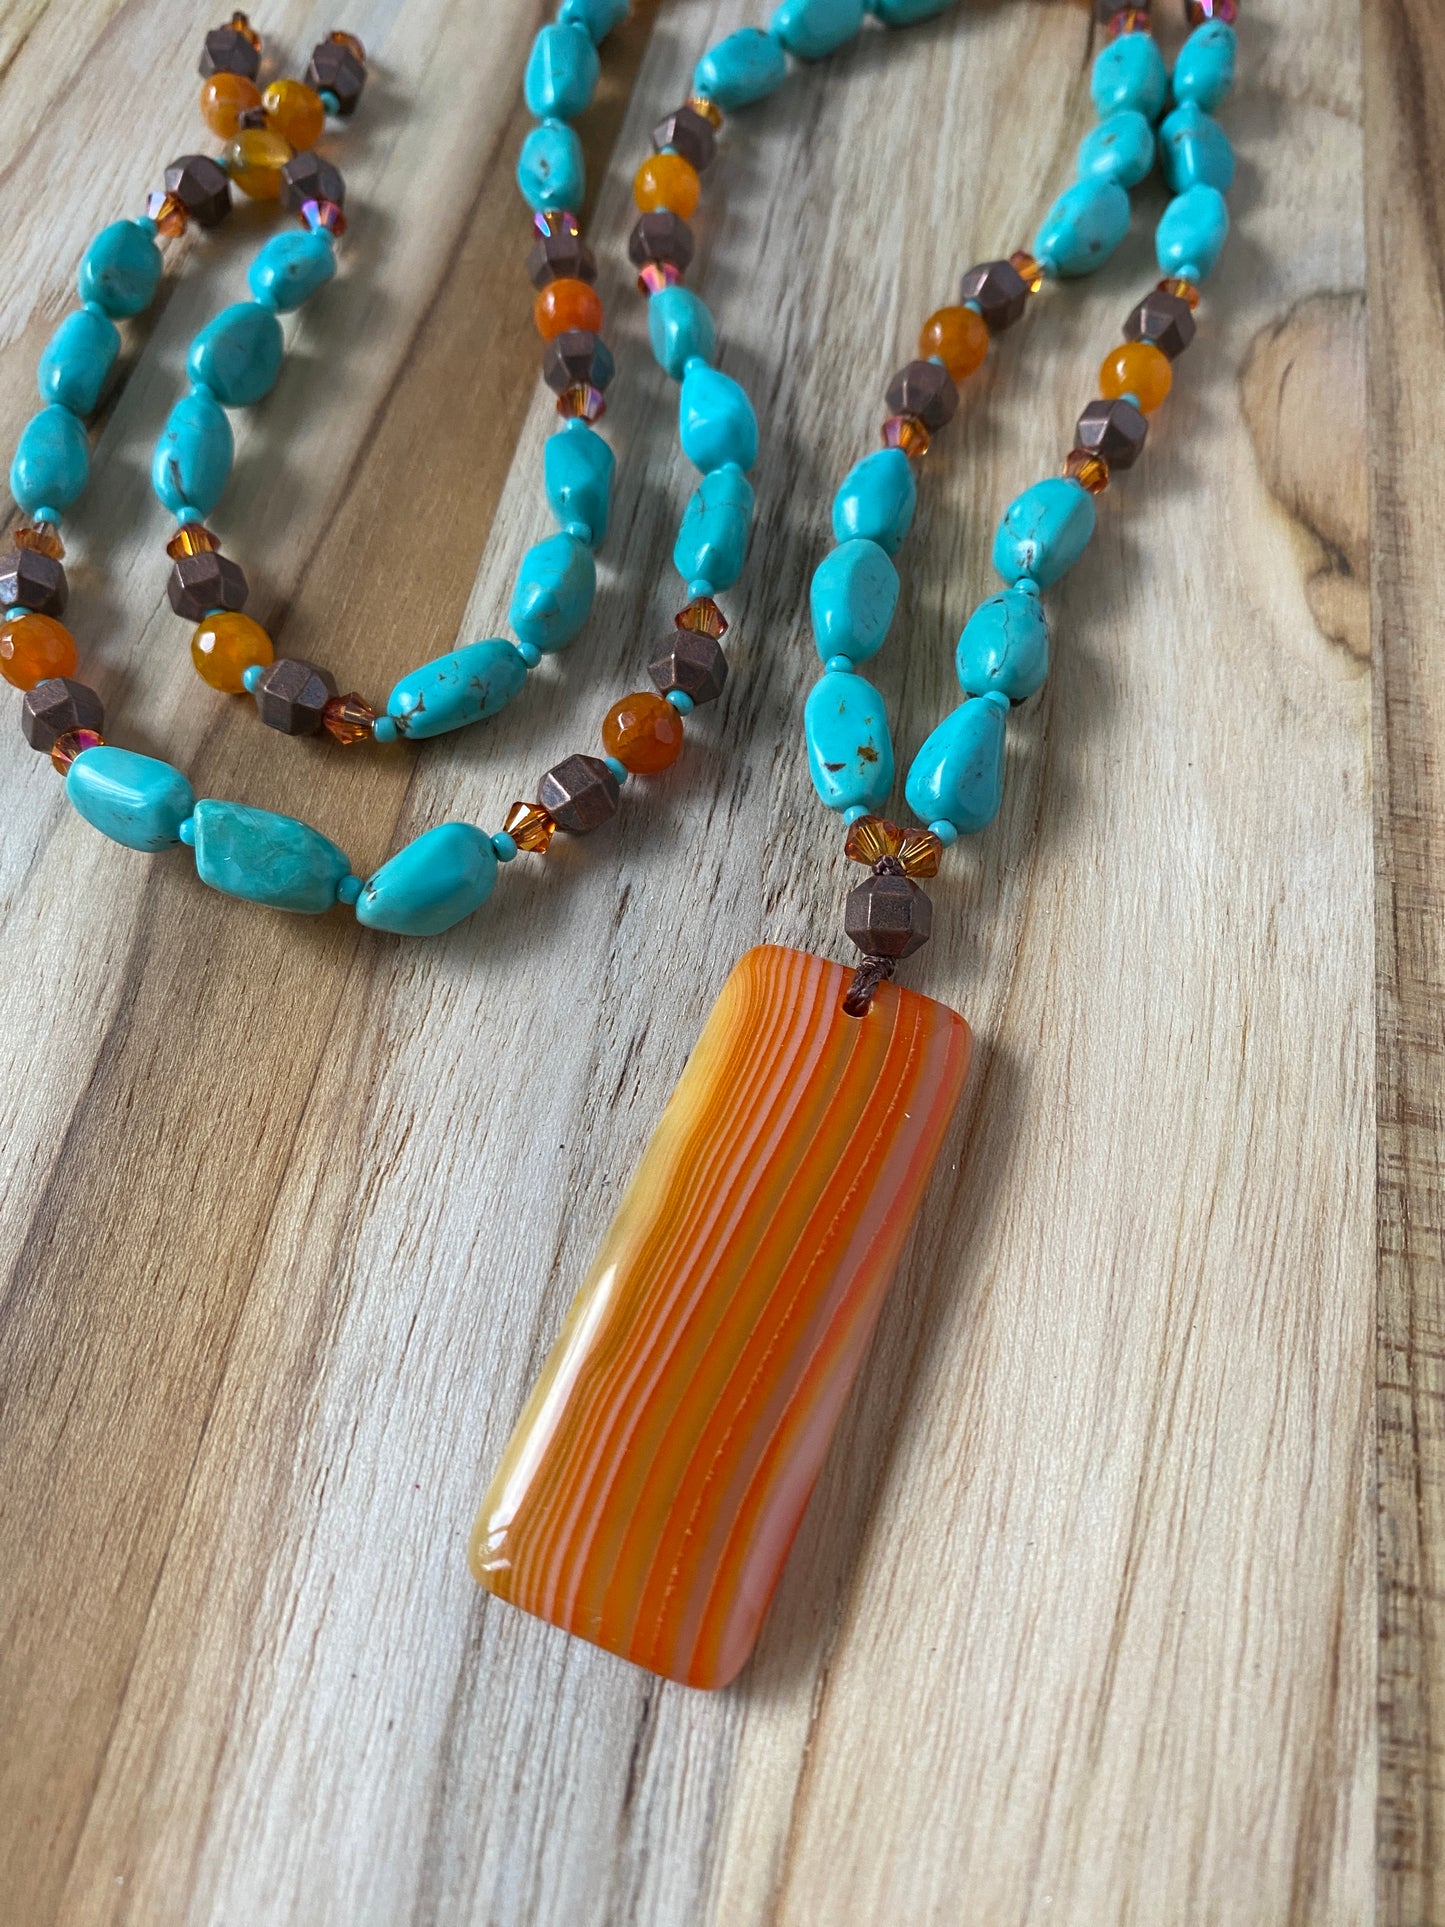 30" Long Orange Agate Pendant Beaded Necklace with Natural Turquoise, Agate & Crystal Beads My Urban Gems